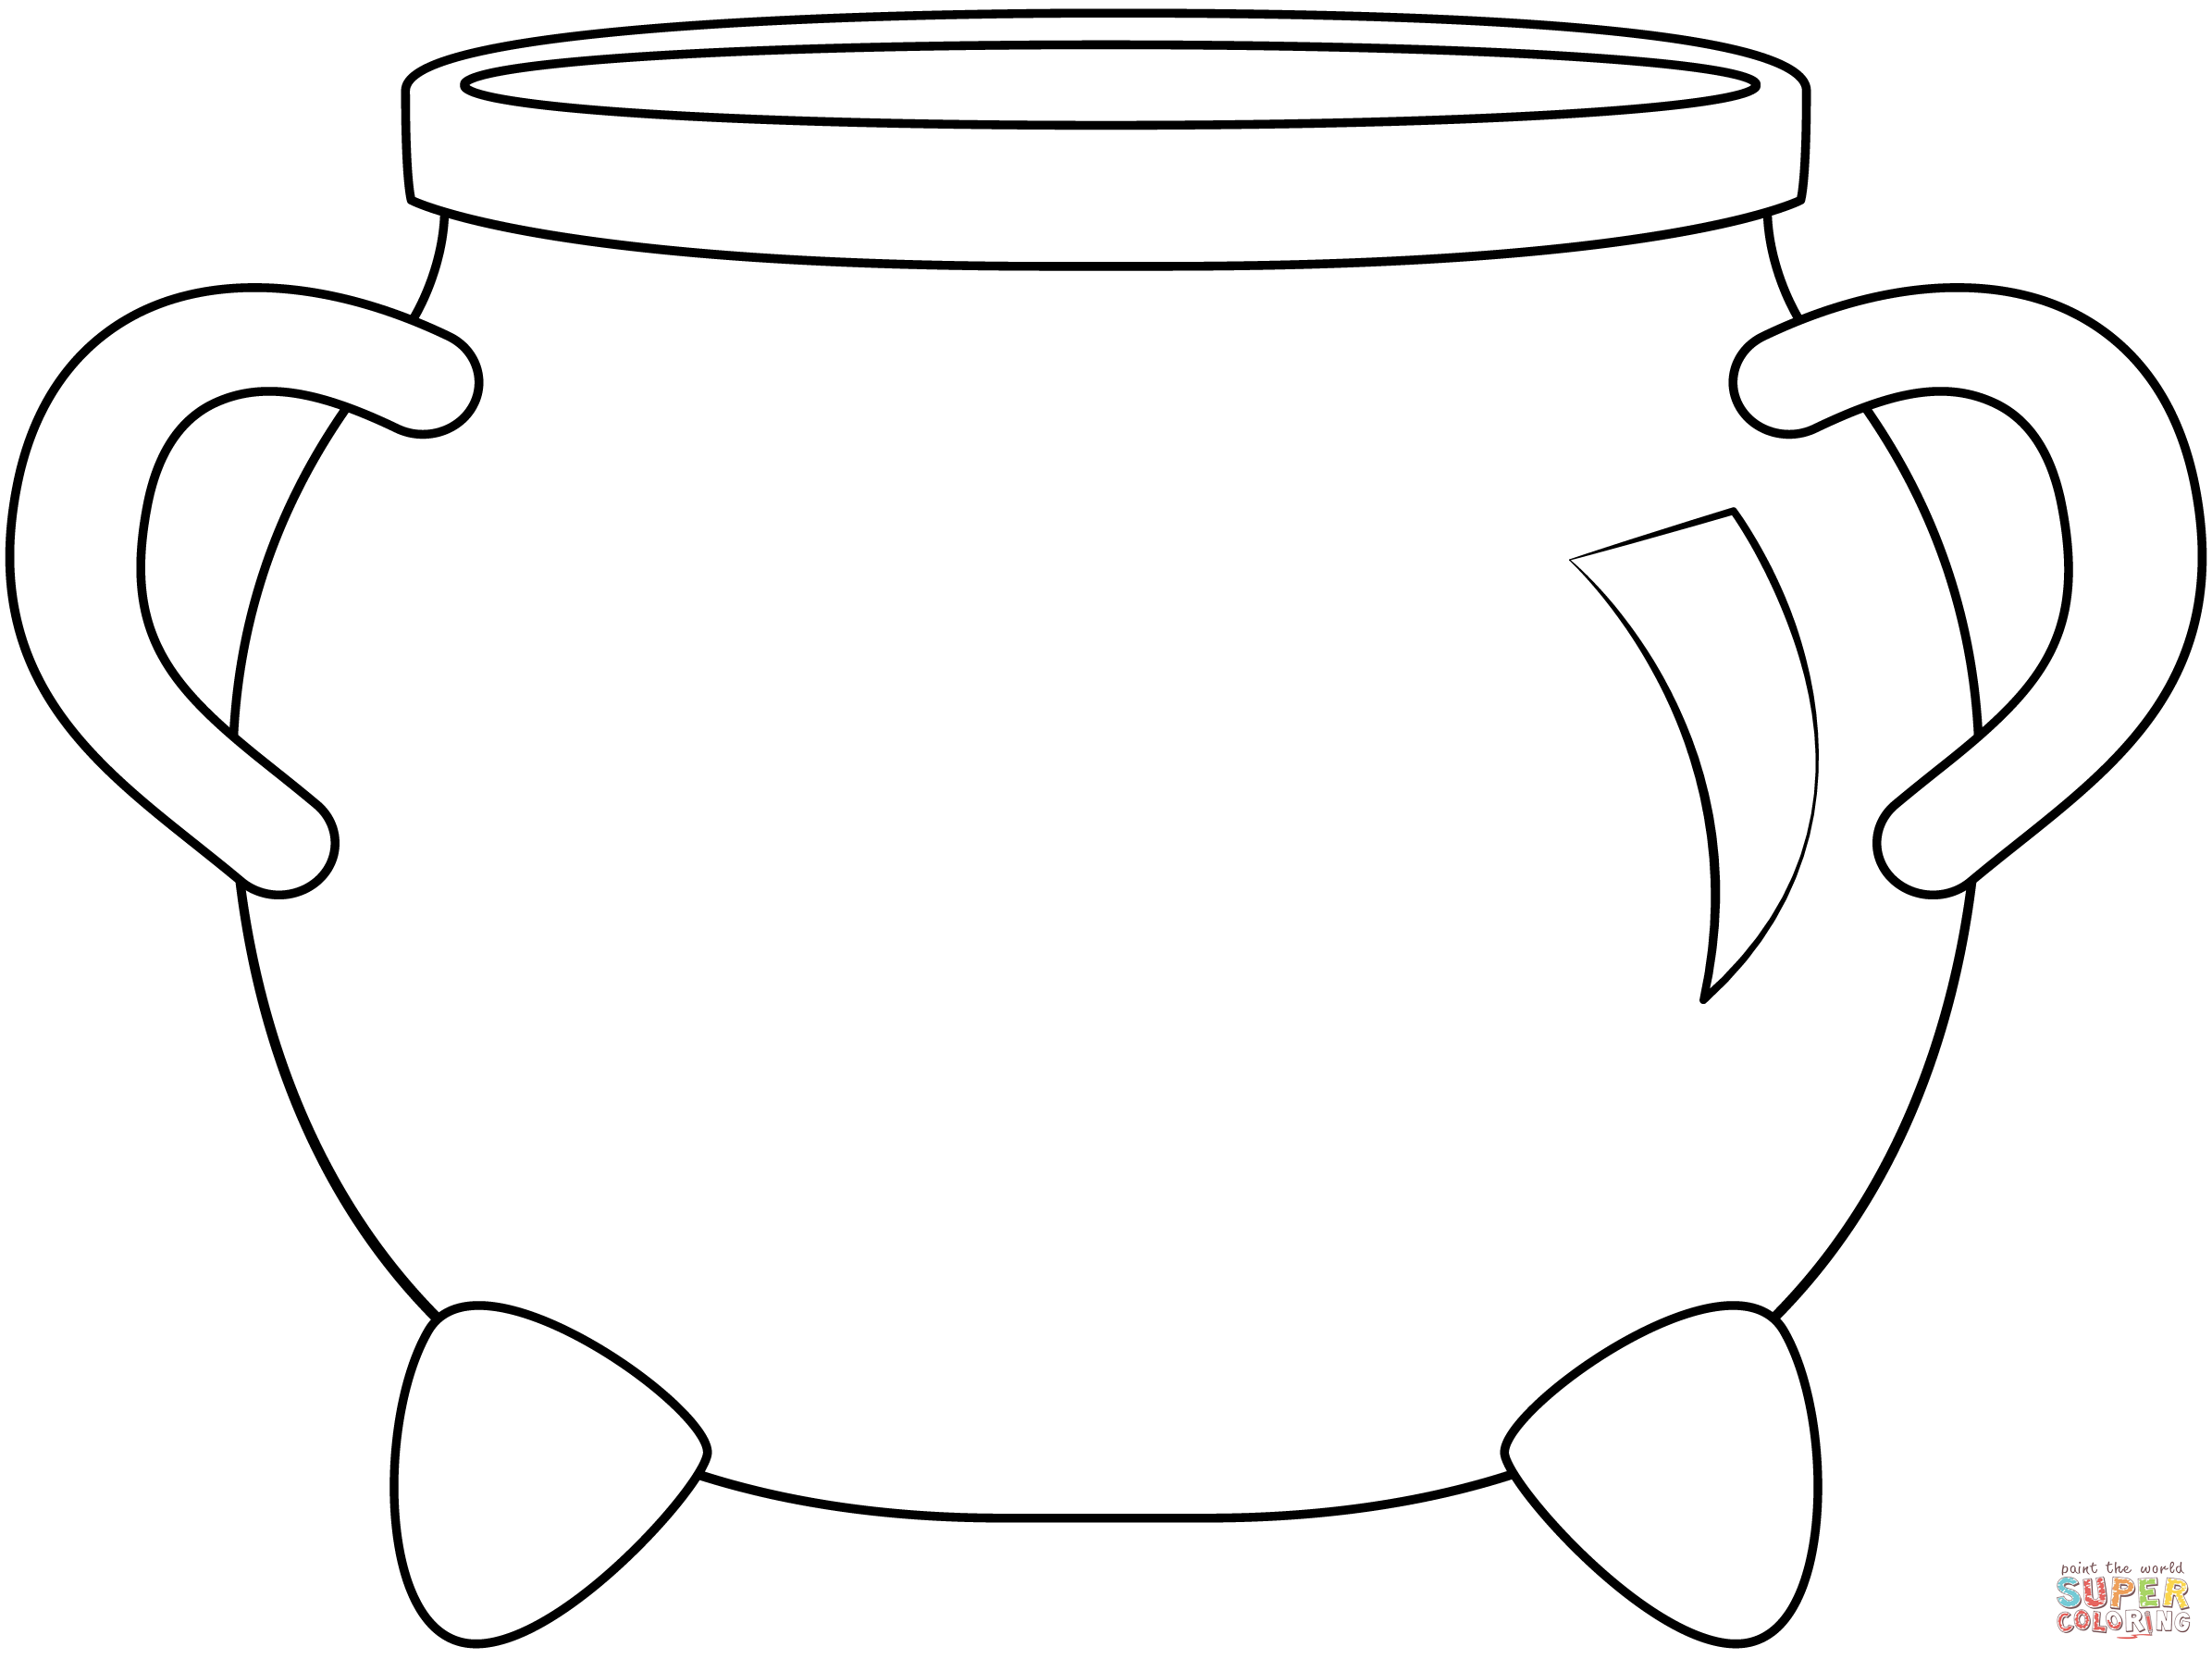 Cauldron coloring page free printable coloring pages